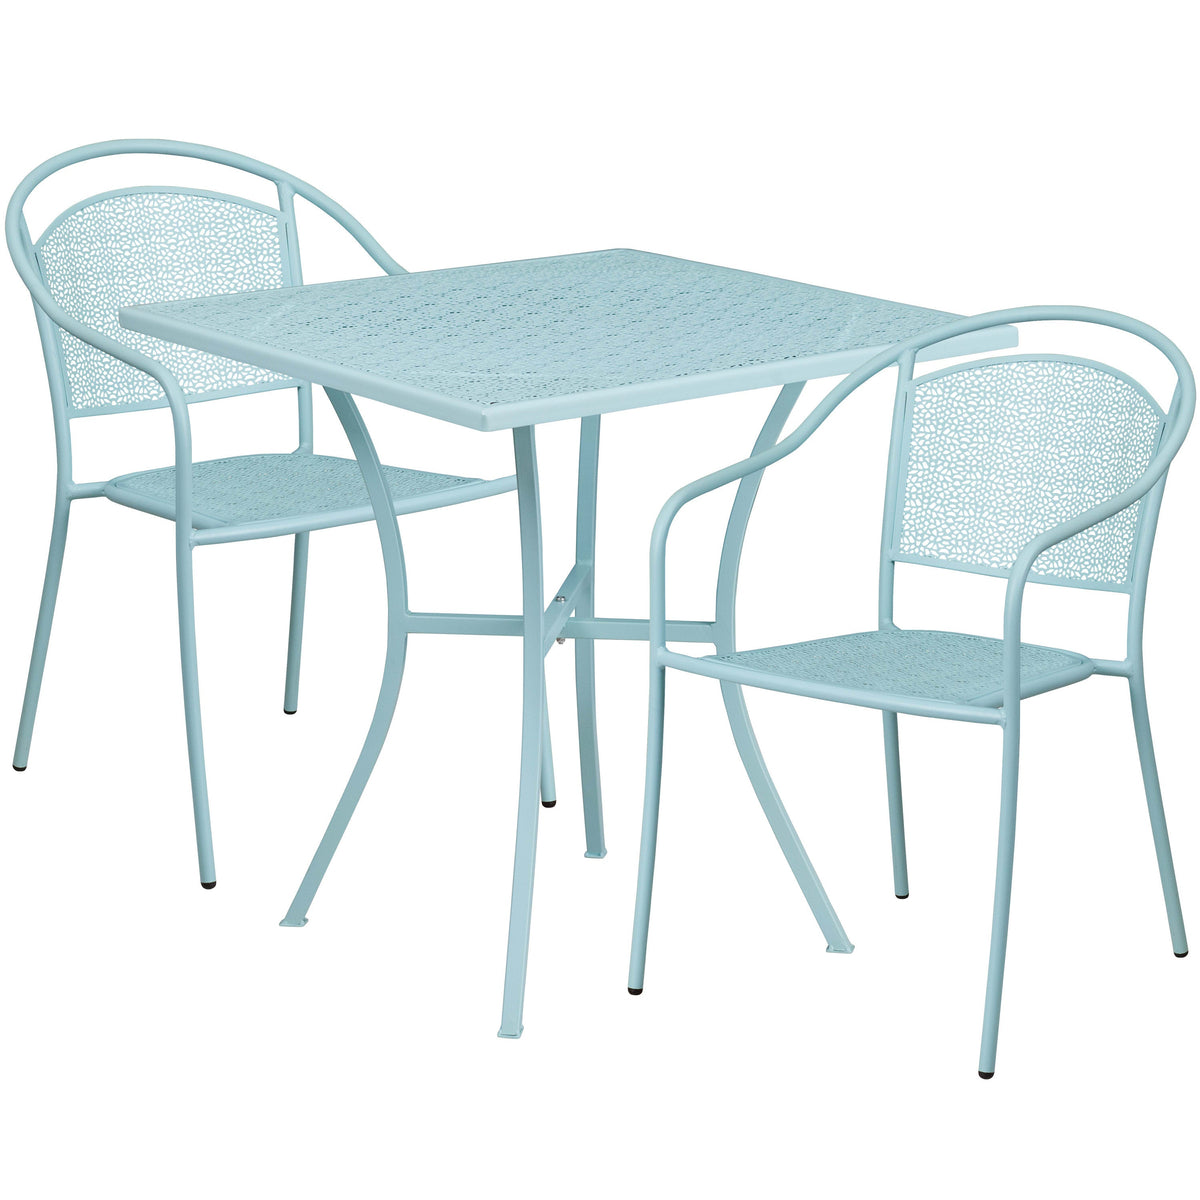 Sky Blue |#| 28inch Square Sky Blue Indoor-Outdoor Steel Patio Table Set - 2 Round Back Chairs